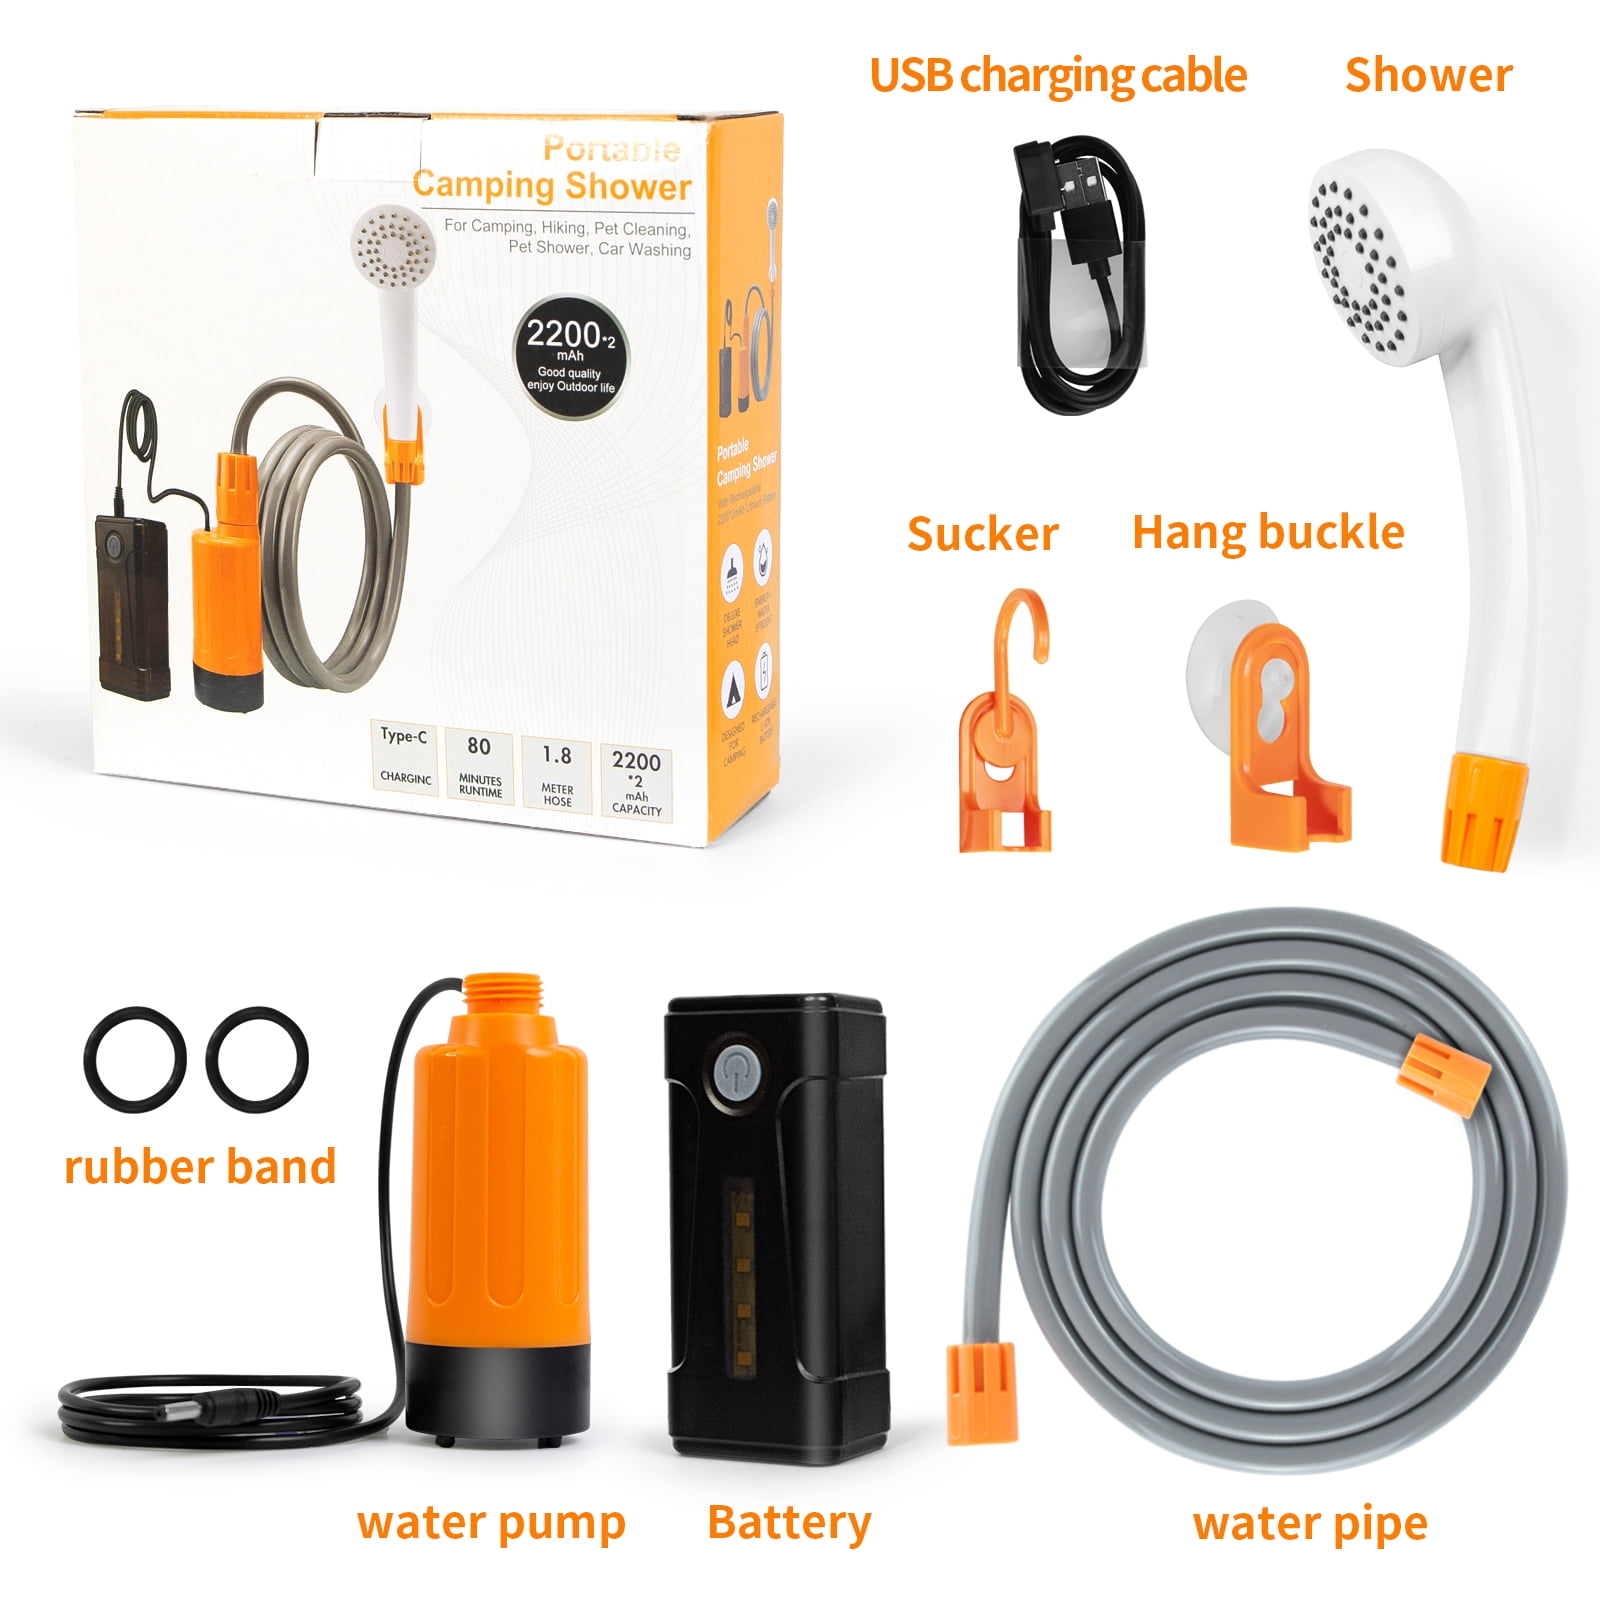  URPRO Portable Camping Shower, Outdoor Shower Head, Shower  Pump, Detachable USB Rechargeable Batteries, Pumps Water from Bucket, for  Camping, Hiking, Pet Cleaning, Pet Shower, Car Washing : Sports & Outdoors